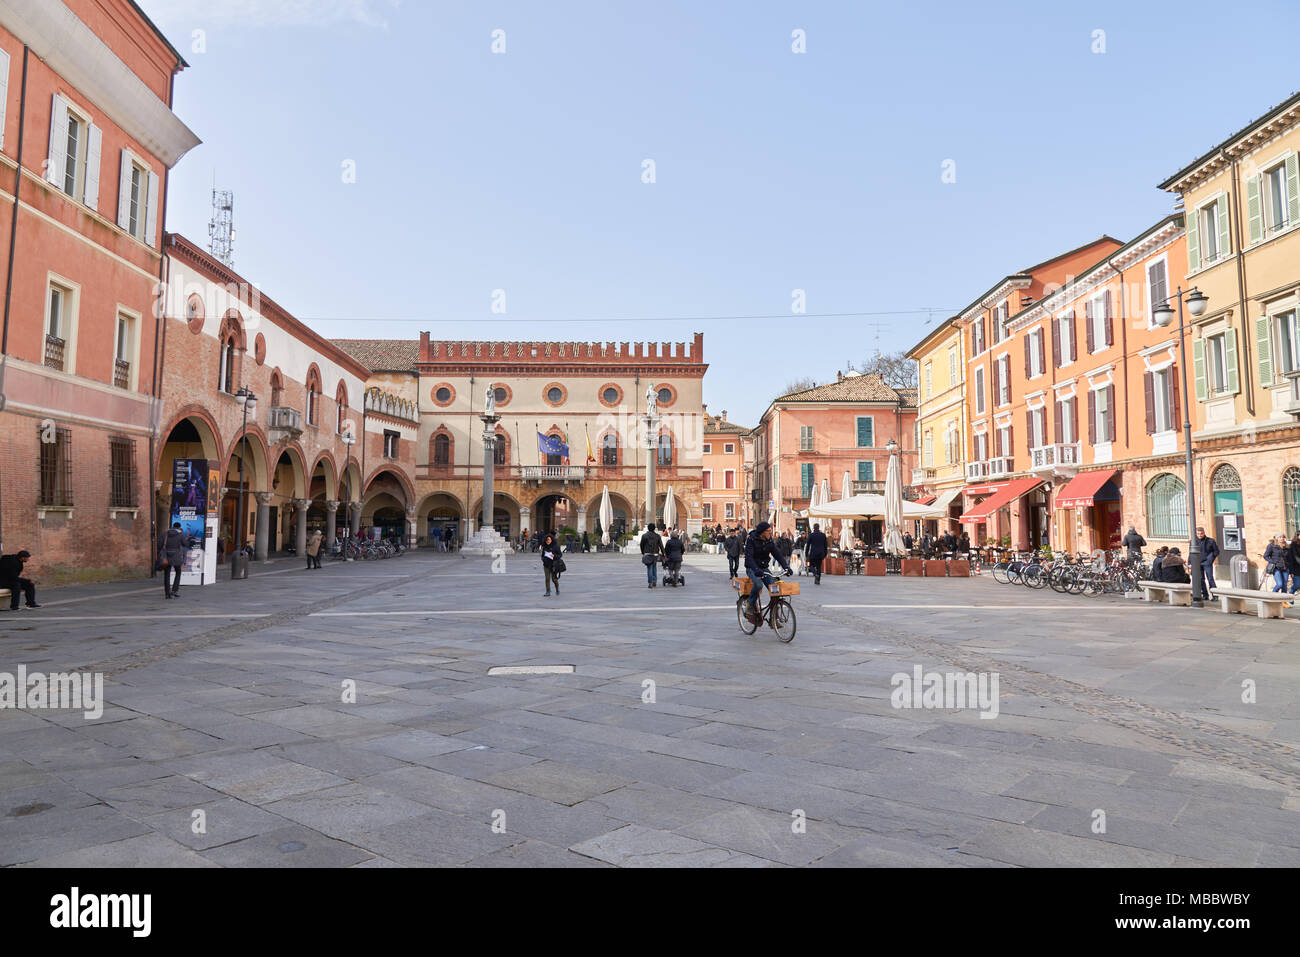 Ravenna, Italy - Febuary 18, 2016: piazza del popolo is one of main squares in Ravenna. It is located near the Tomba di Dante. Stock Photo